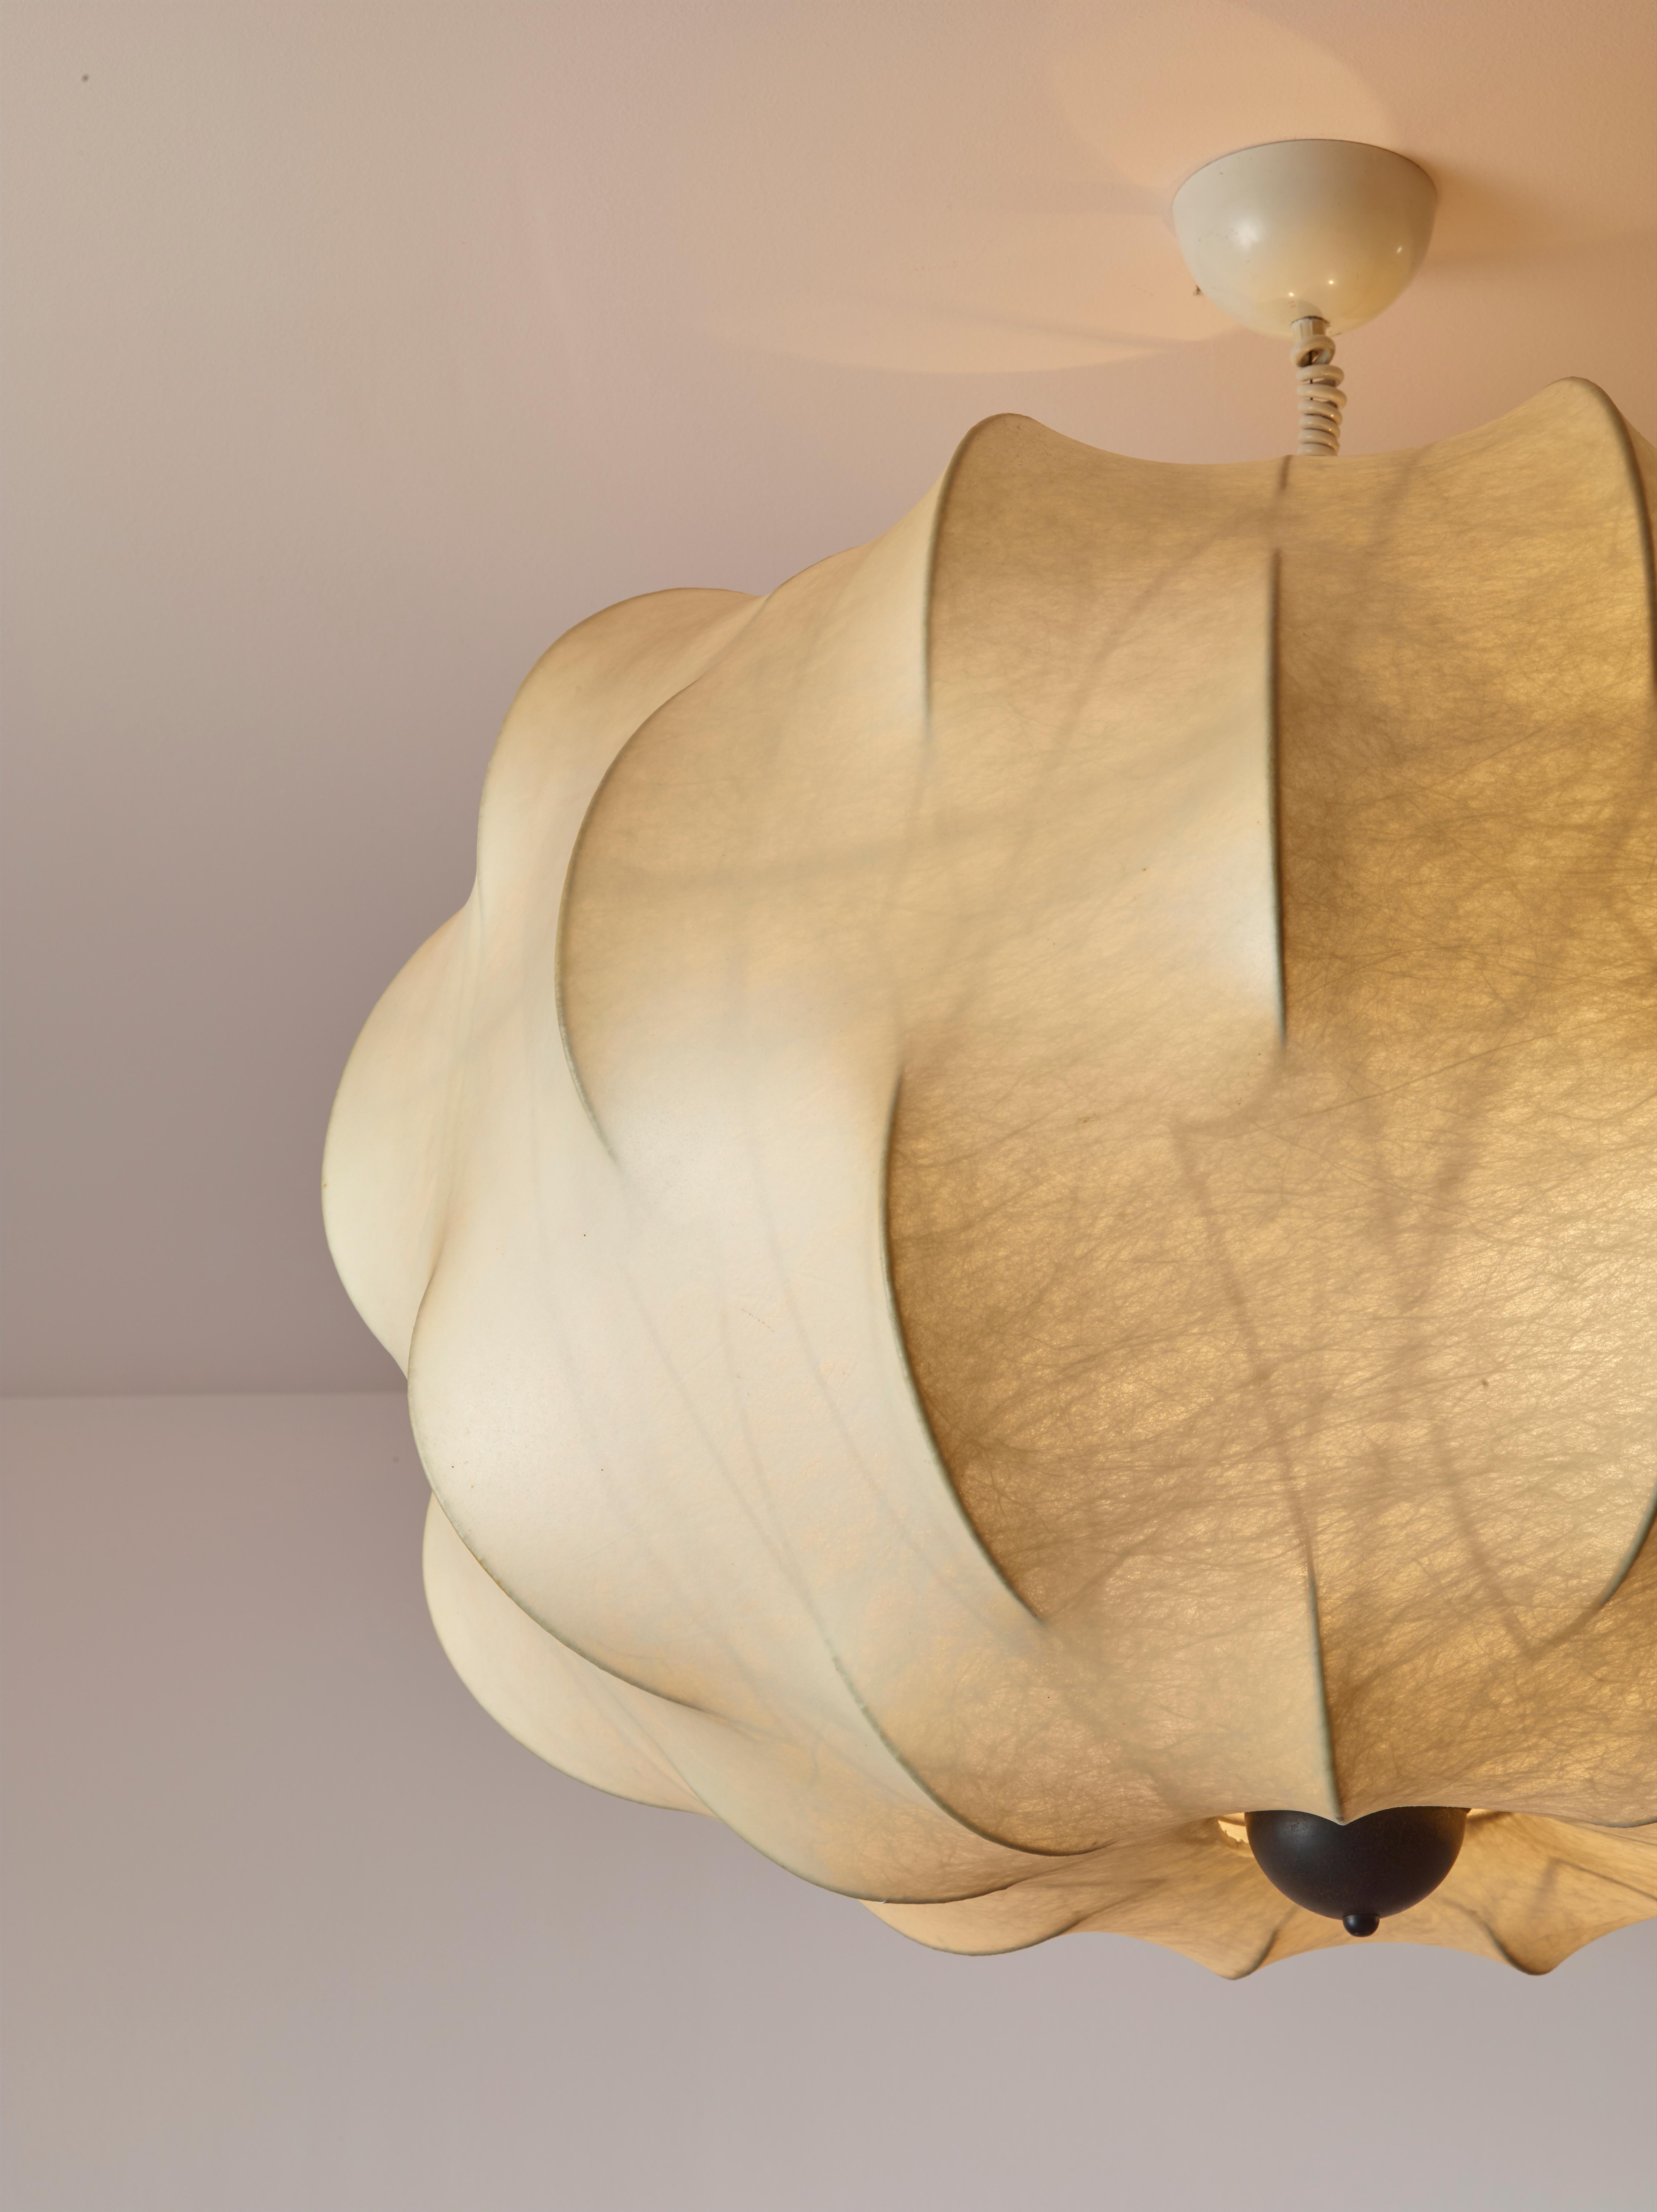 Tobia Scarpa Large Italian Mid Century Cocoon Nuvola Chandelier Flos, Italy 1962 In Good Condition For Sale In Chiavari, Liguria